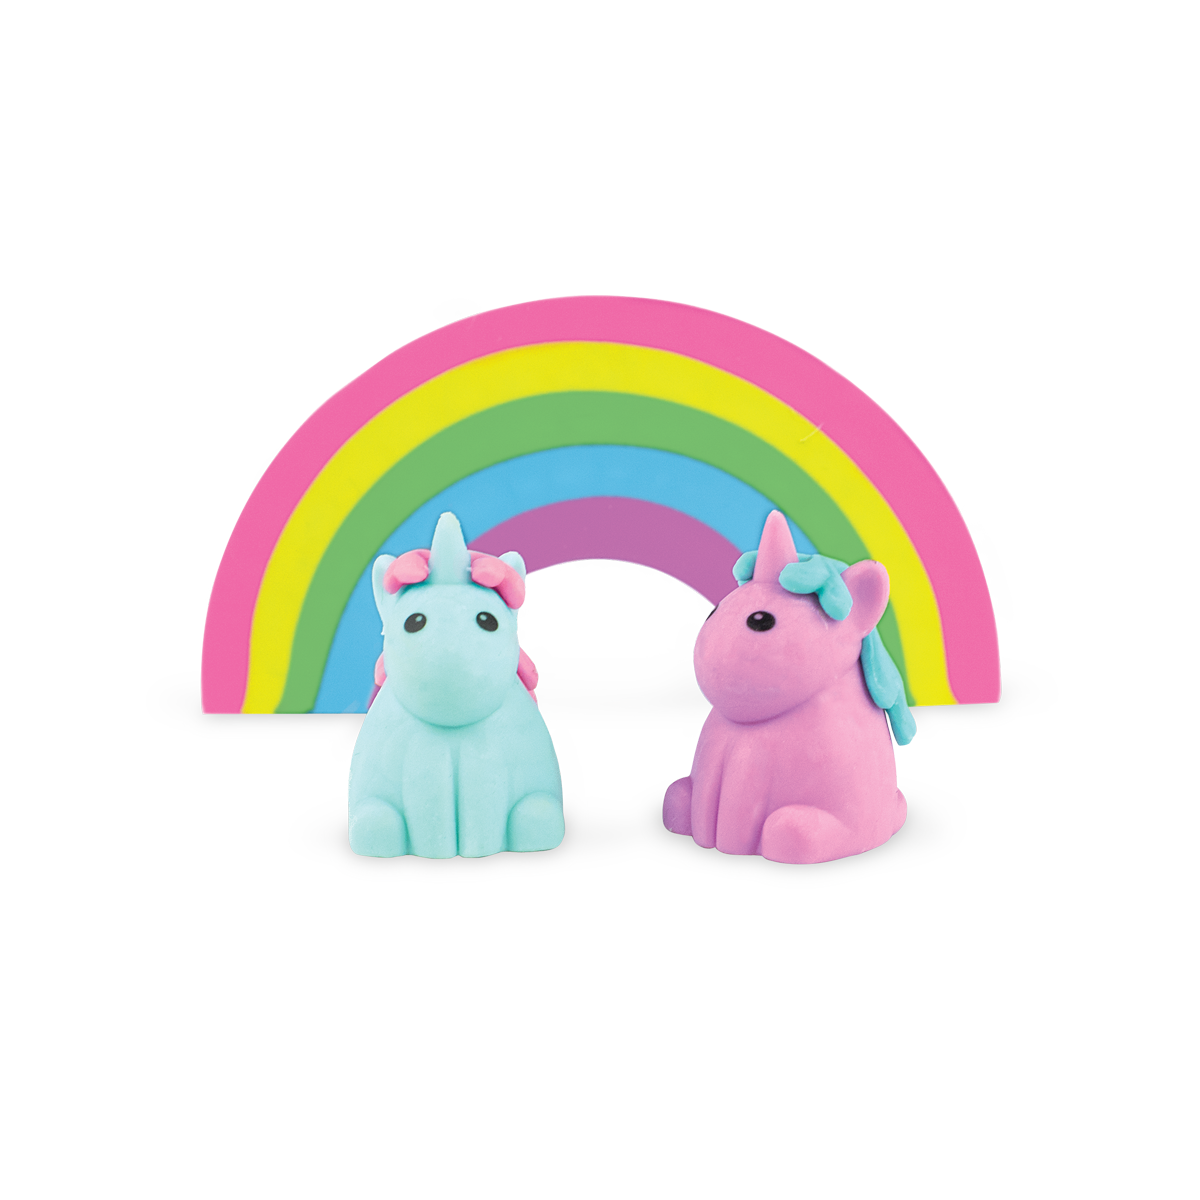 2 unicorn erasers and a large rainbow pencil eraser from the Unique Unicorns scented eraser set